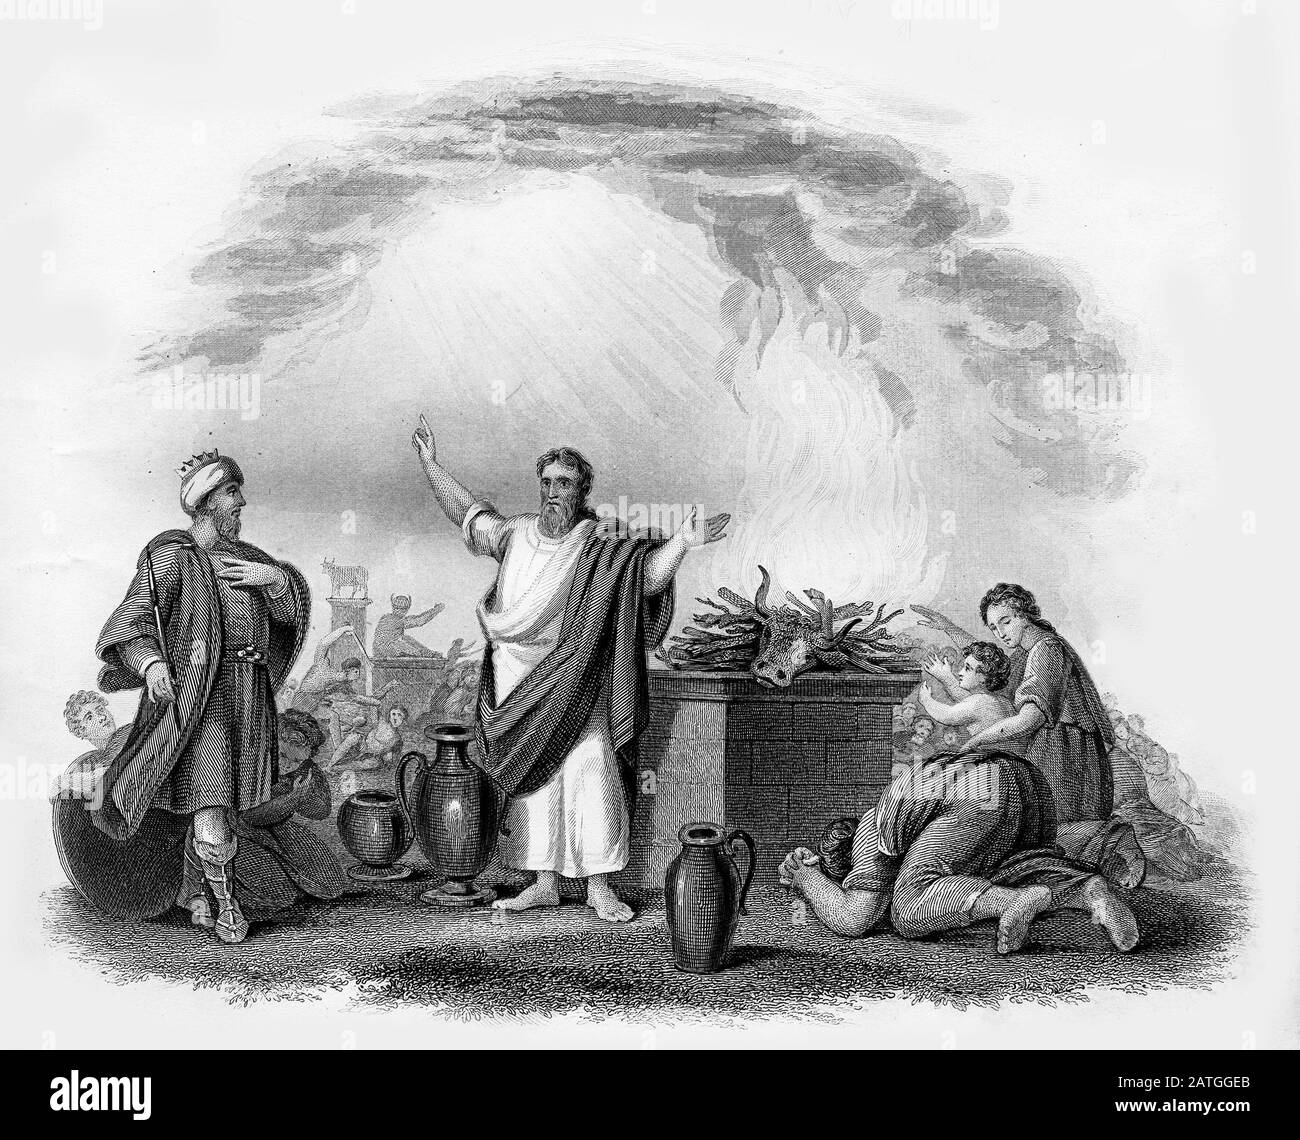 Engraving of the prophet Elijah defeating the prophets of Baal. King Ahab stands to the left while the proophets of Baal are executed in the background. From the title page of an edition of Josephus,  printed in the 1800s. Stock Photo